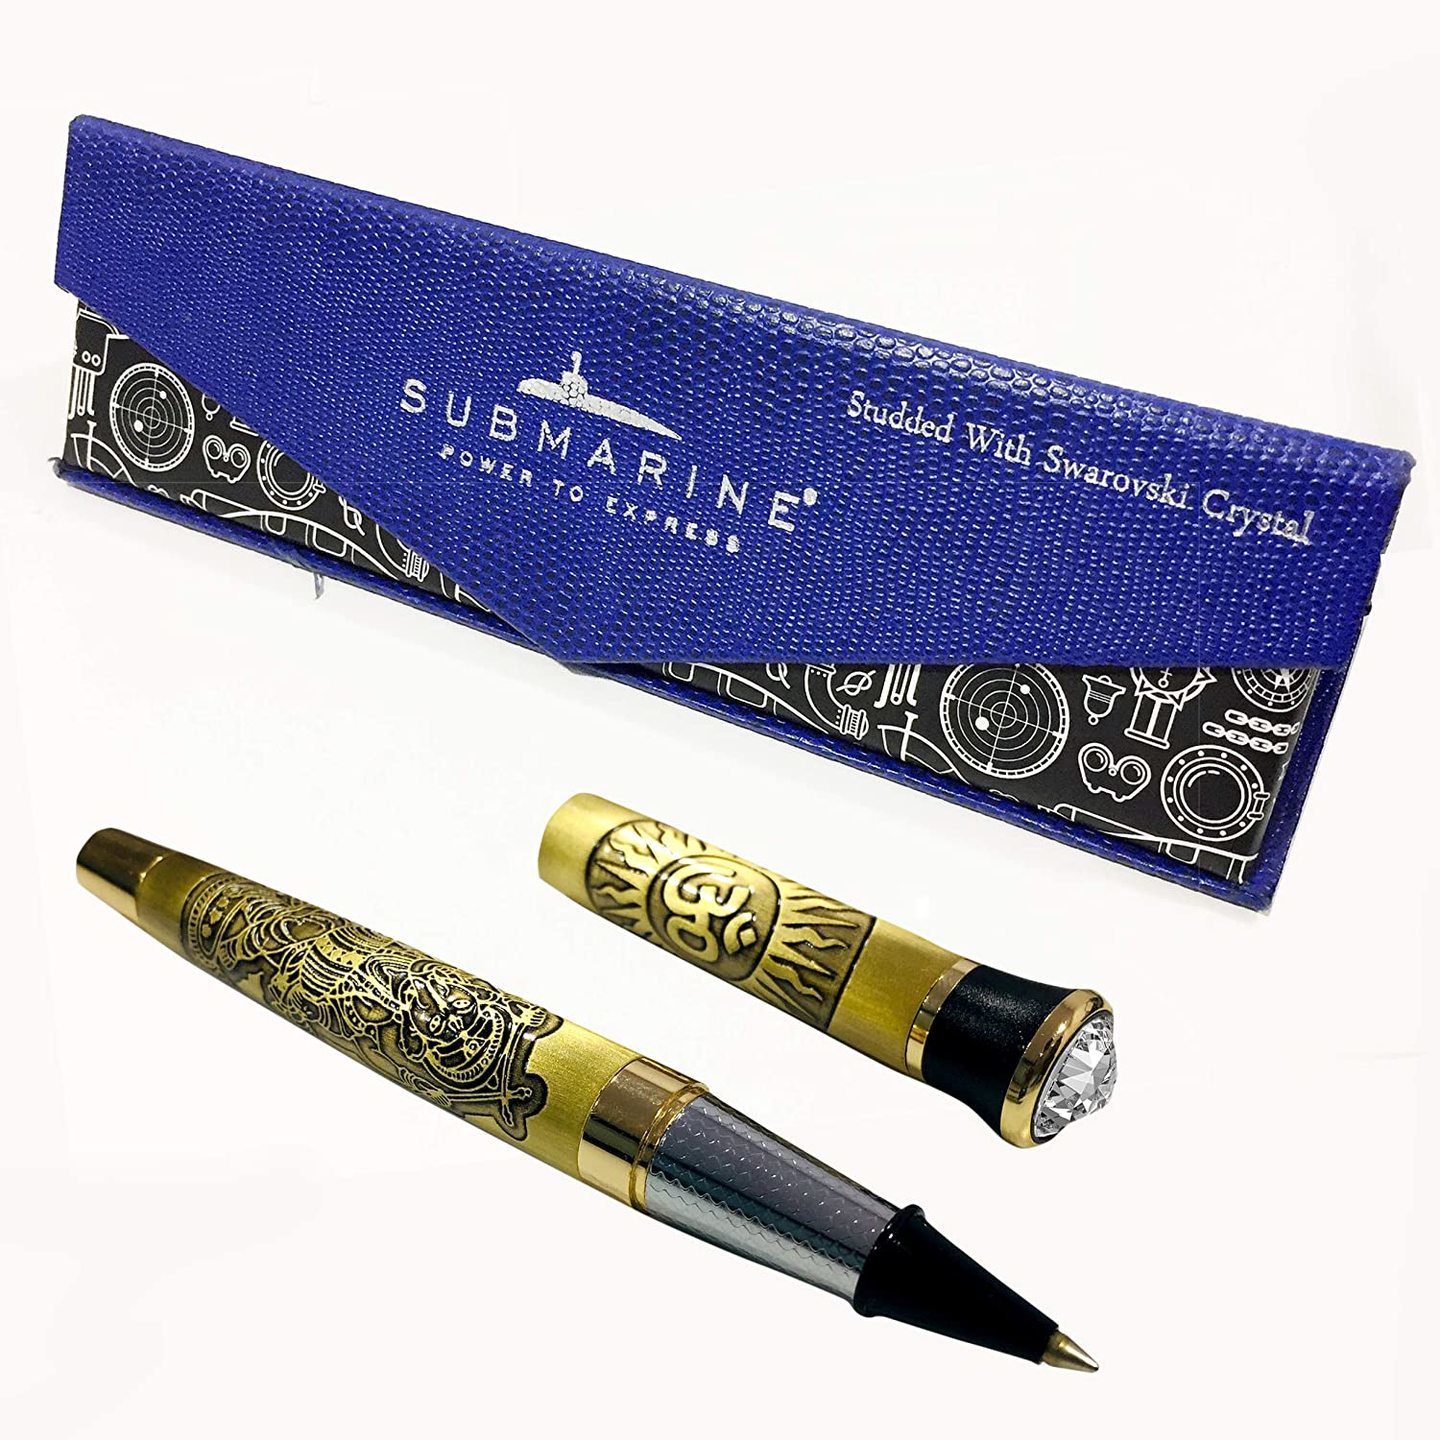 Submarine Gold Plated Ganesha Engraved with Swarovski Crystal on Top Ball Pen with Box